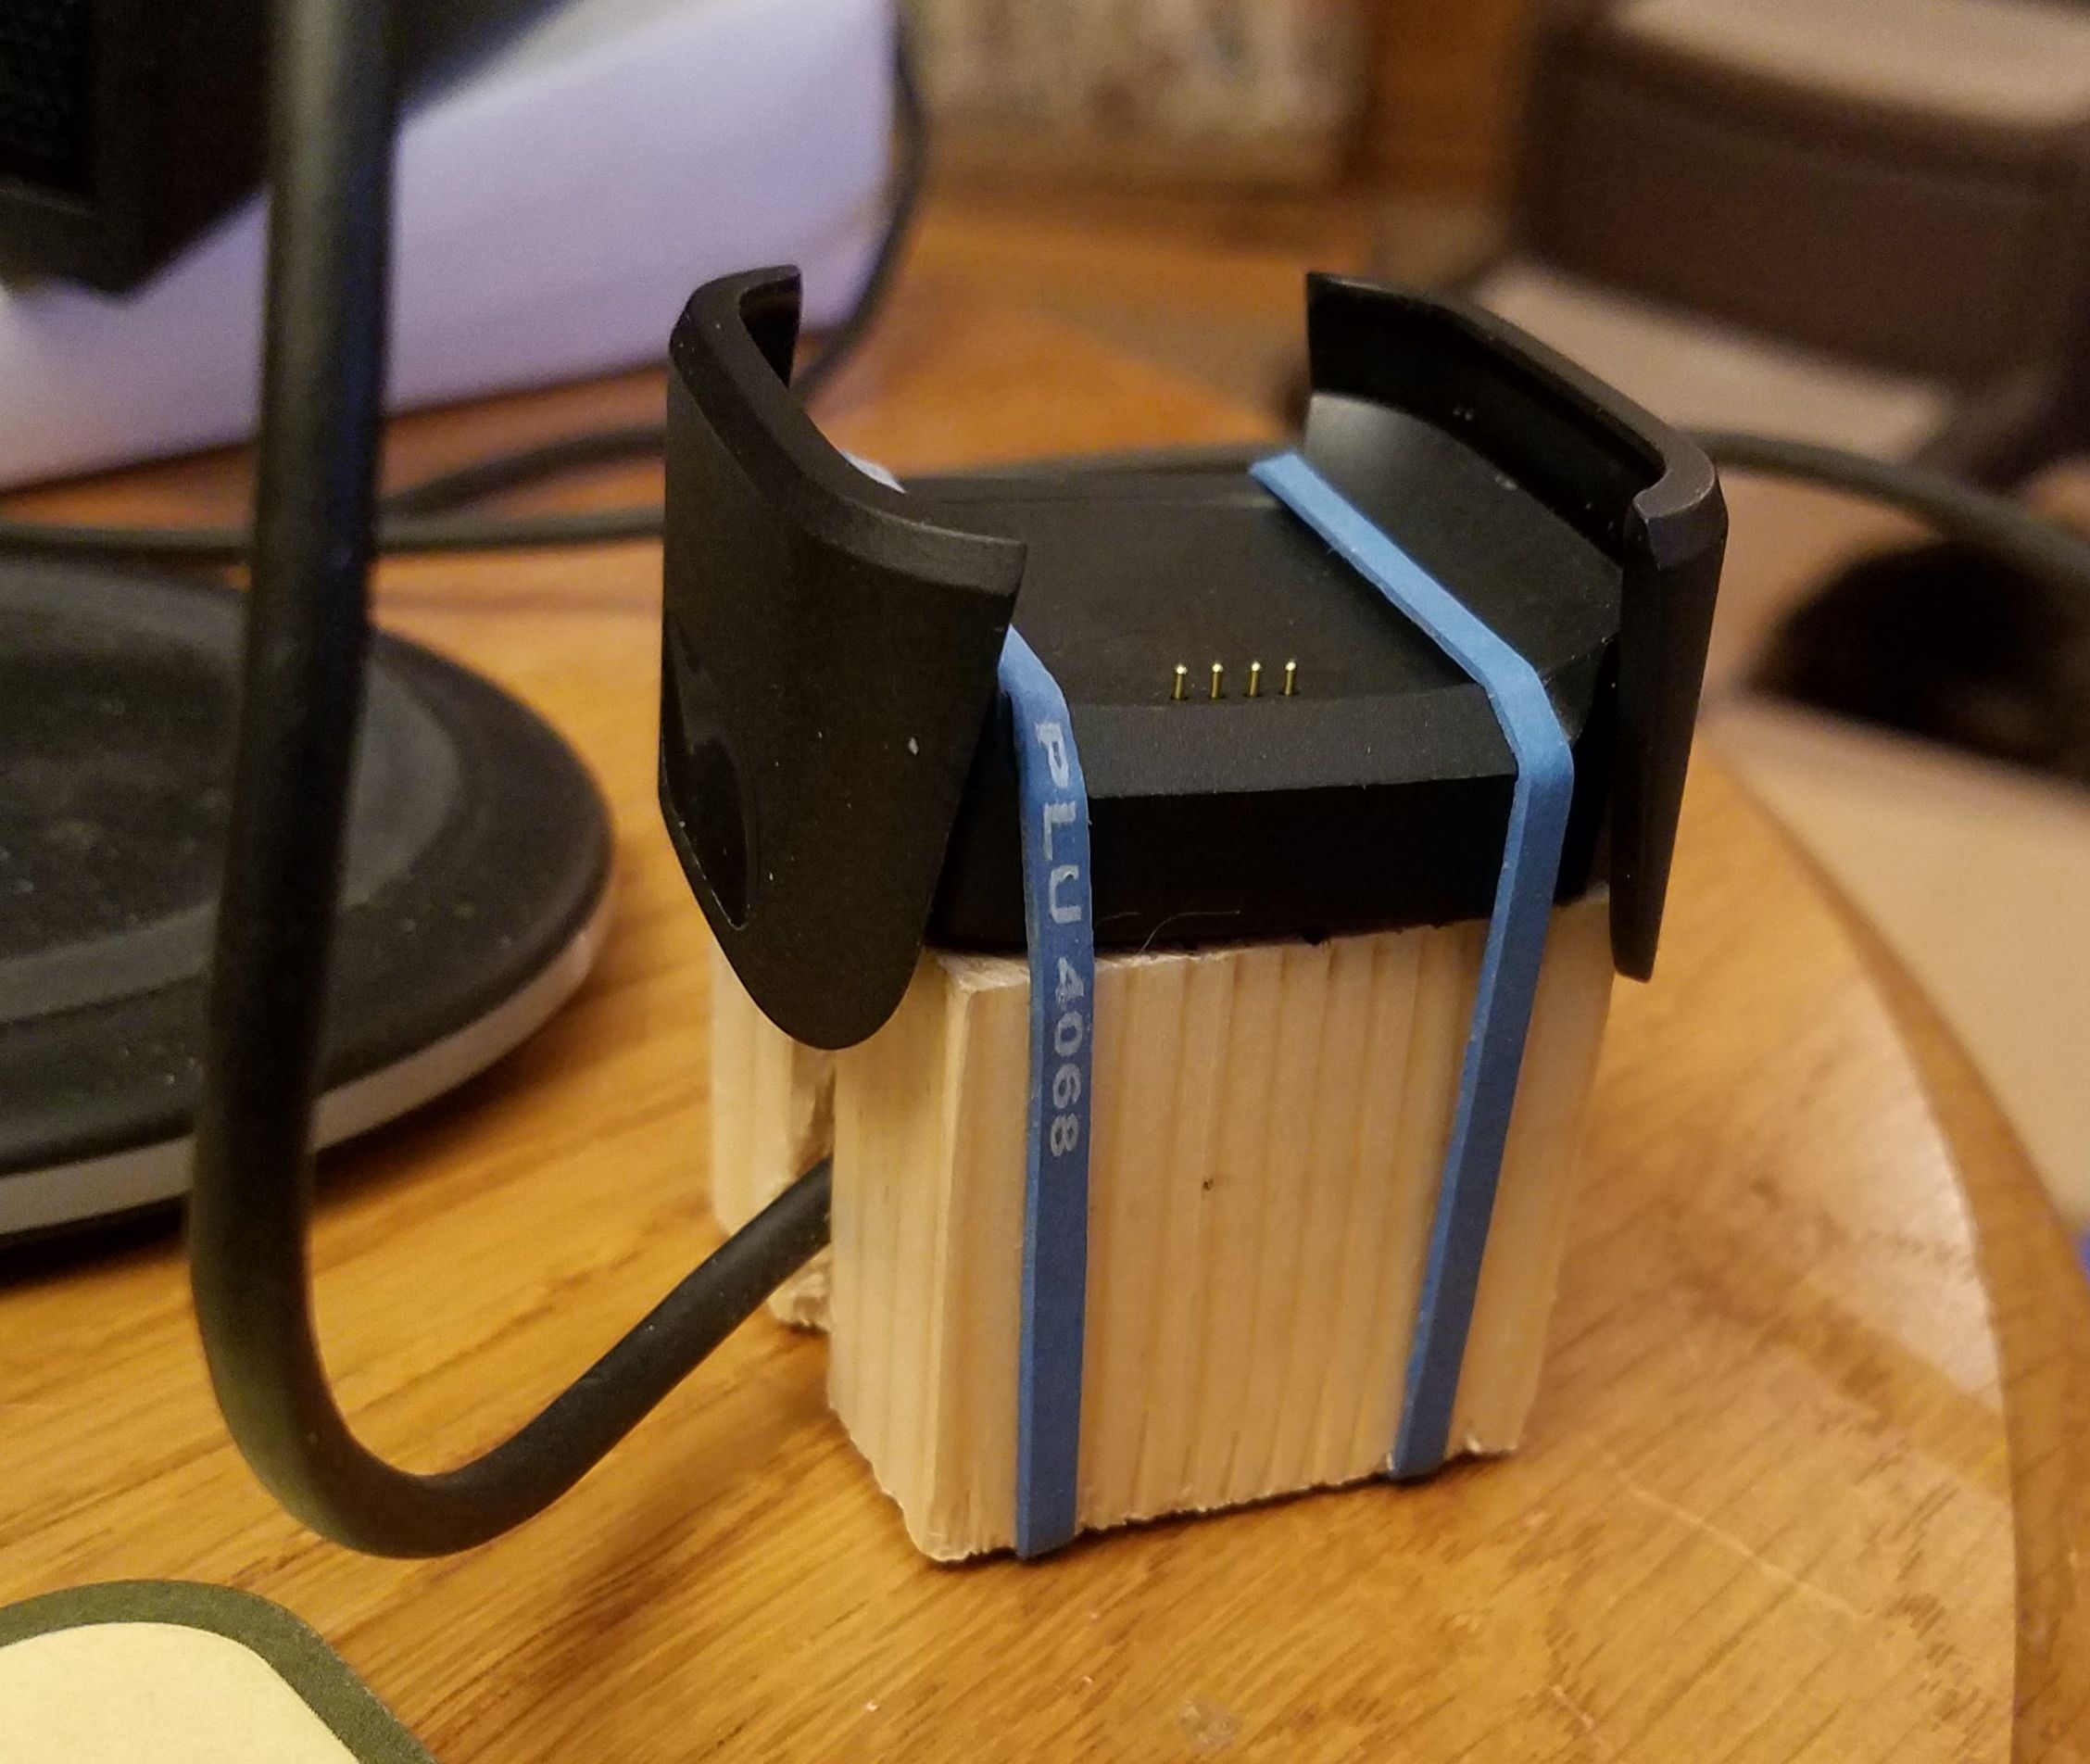 fitbit versa 2 charger